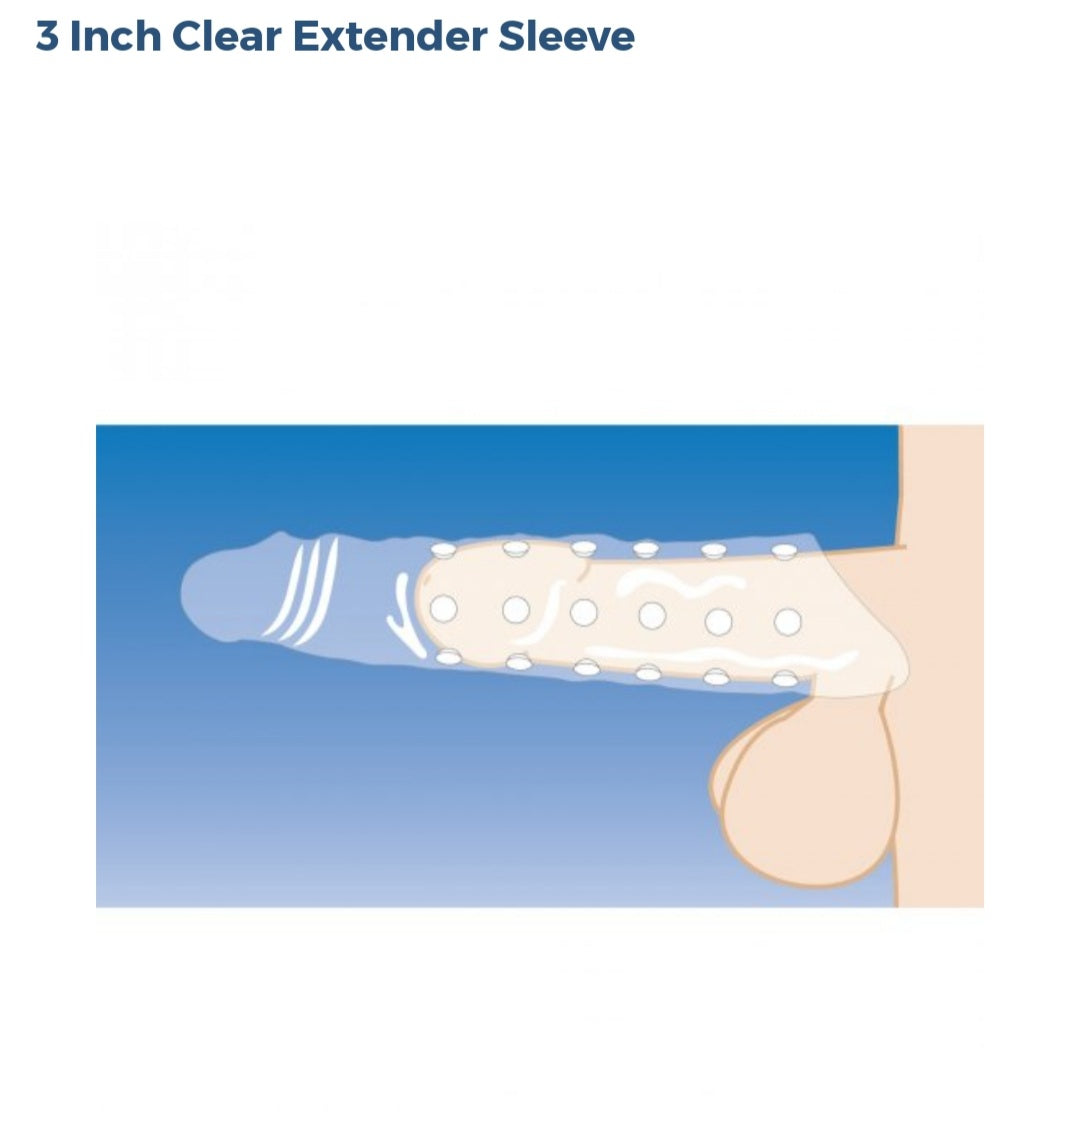 3 Inch Clear Extender Sleeve